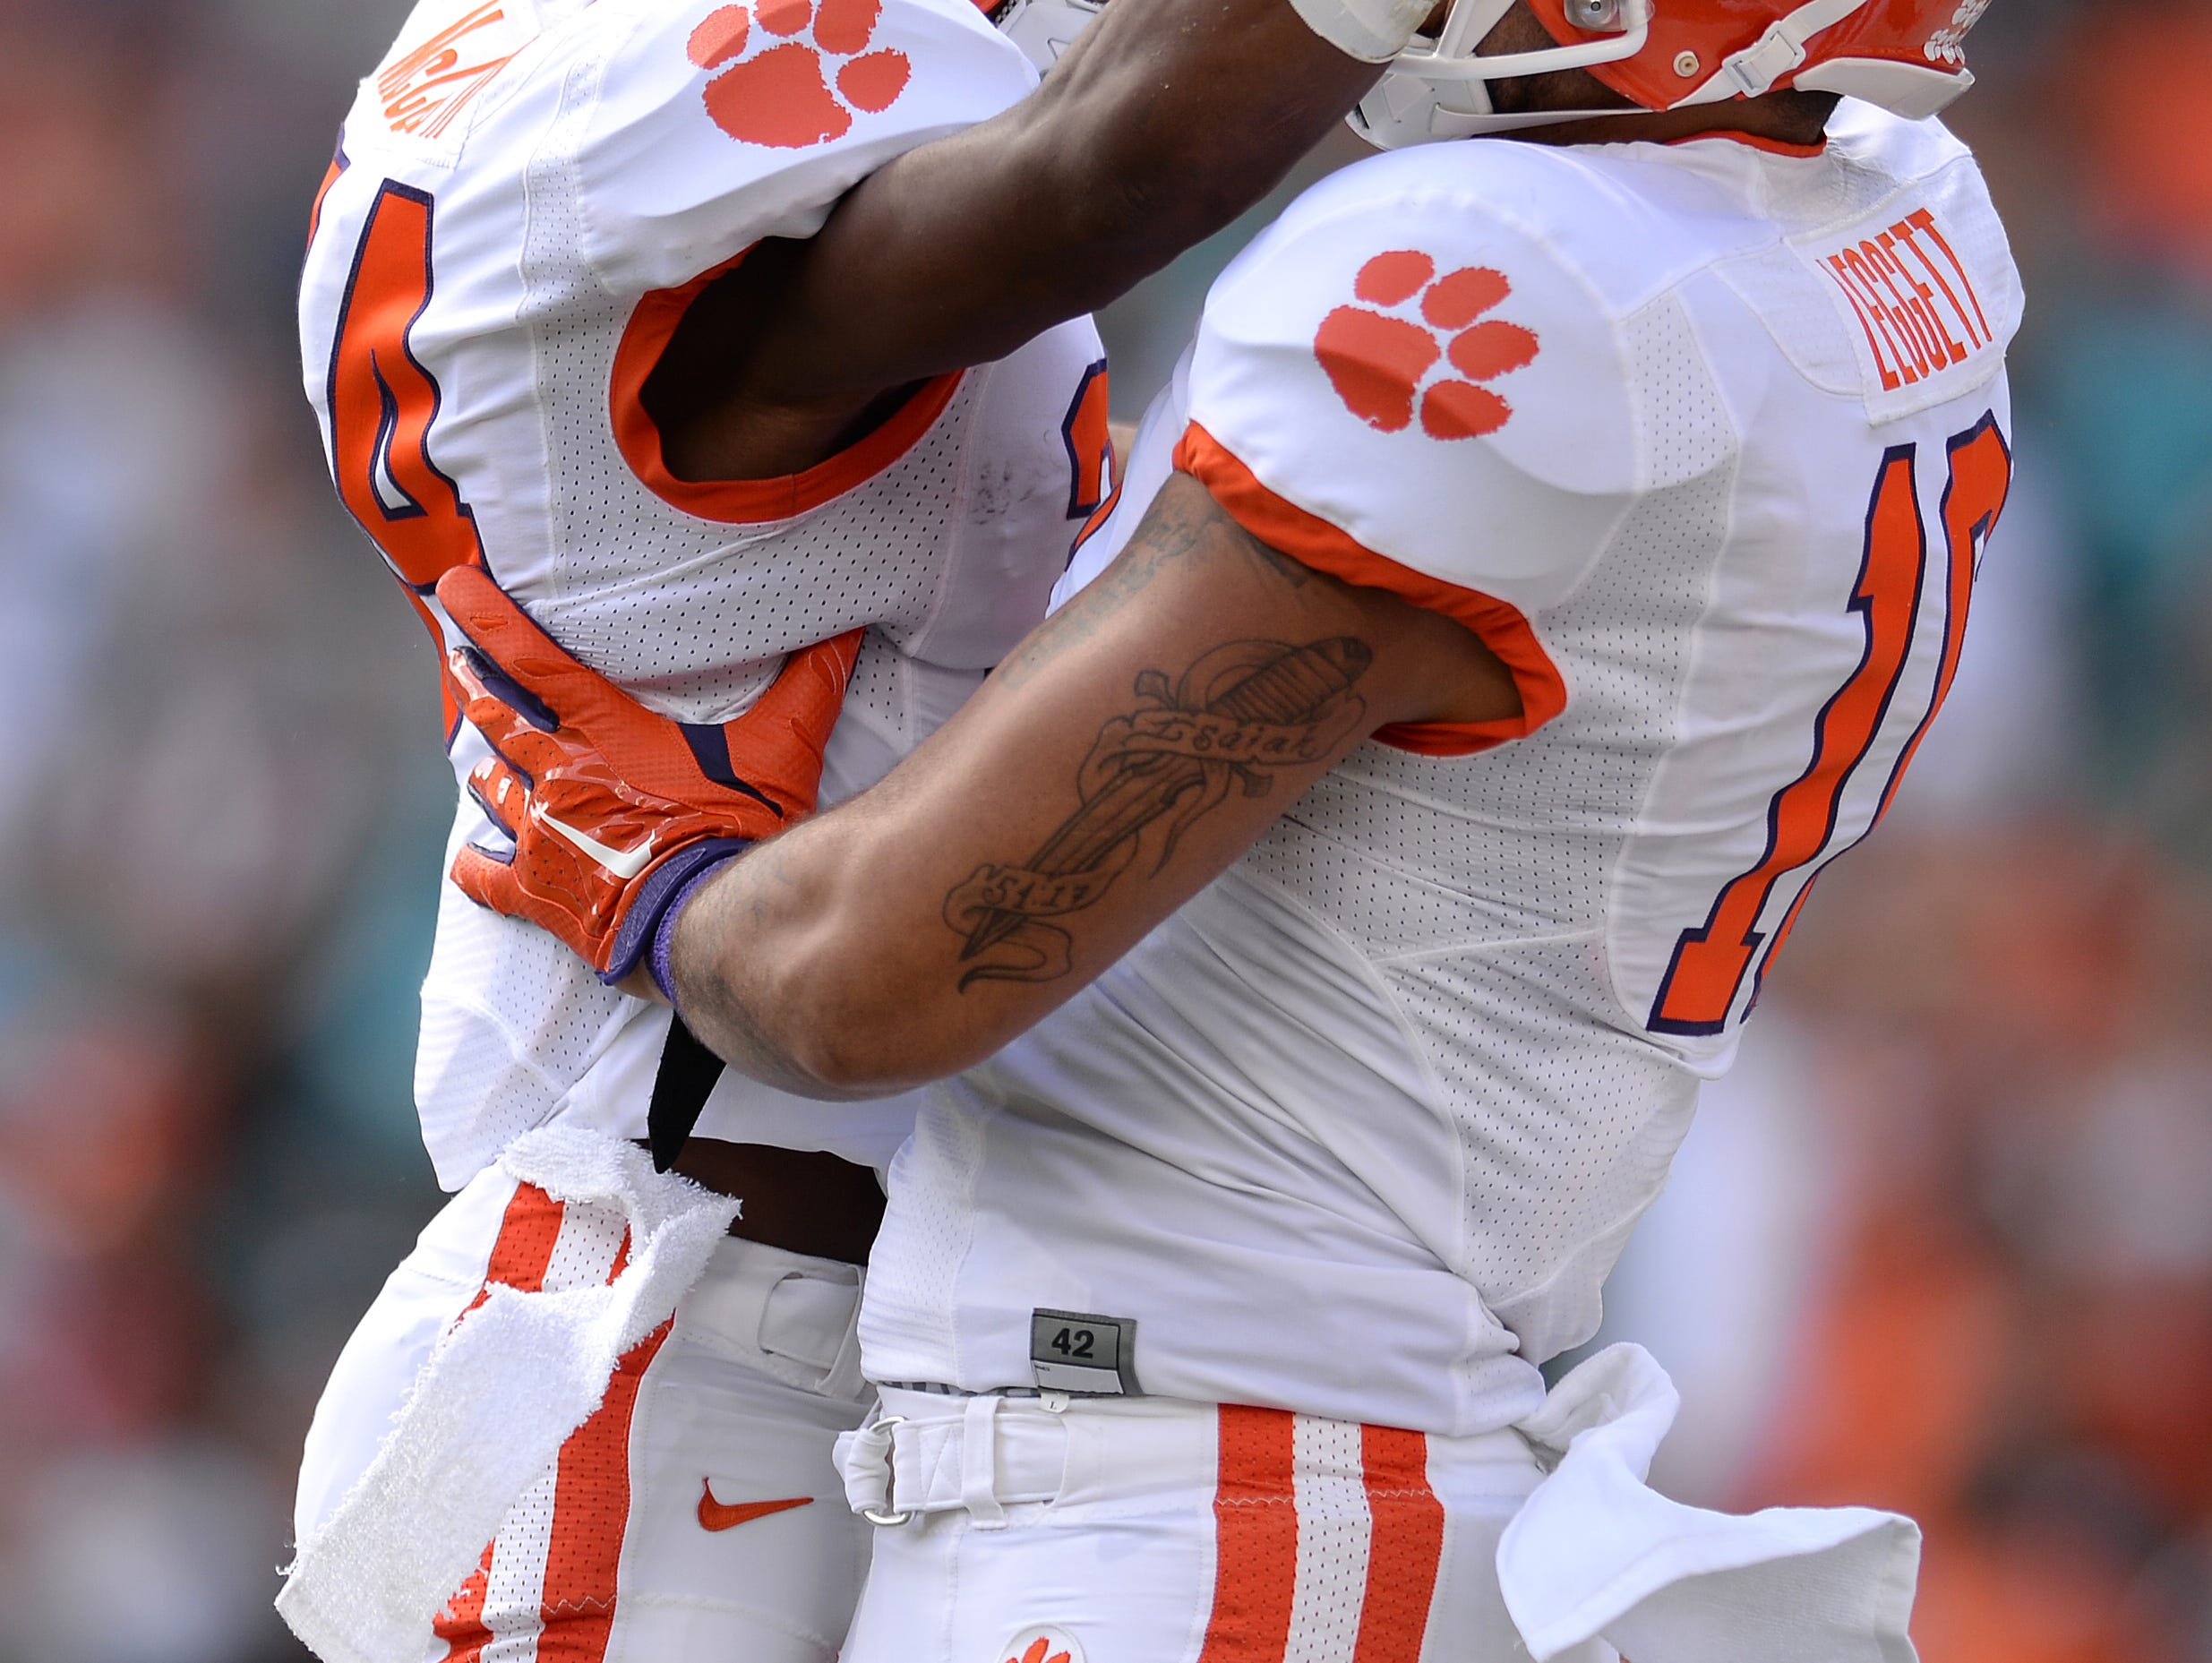 Clemson tight end Jordan Leggett (16) celebrates with wide receiver Ray Ray McCloud (34) after scoring on a 34 yard reception against Miami during the 1st quarter Saturday, Oct. 24, 2015, in Miami Gardens, Fla. The TD was Leggett's 5th TD in 5 consecutive games.